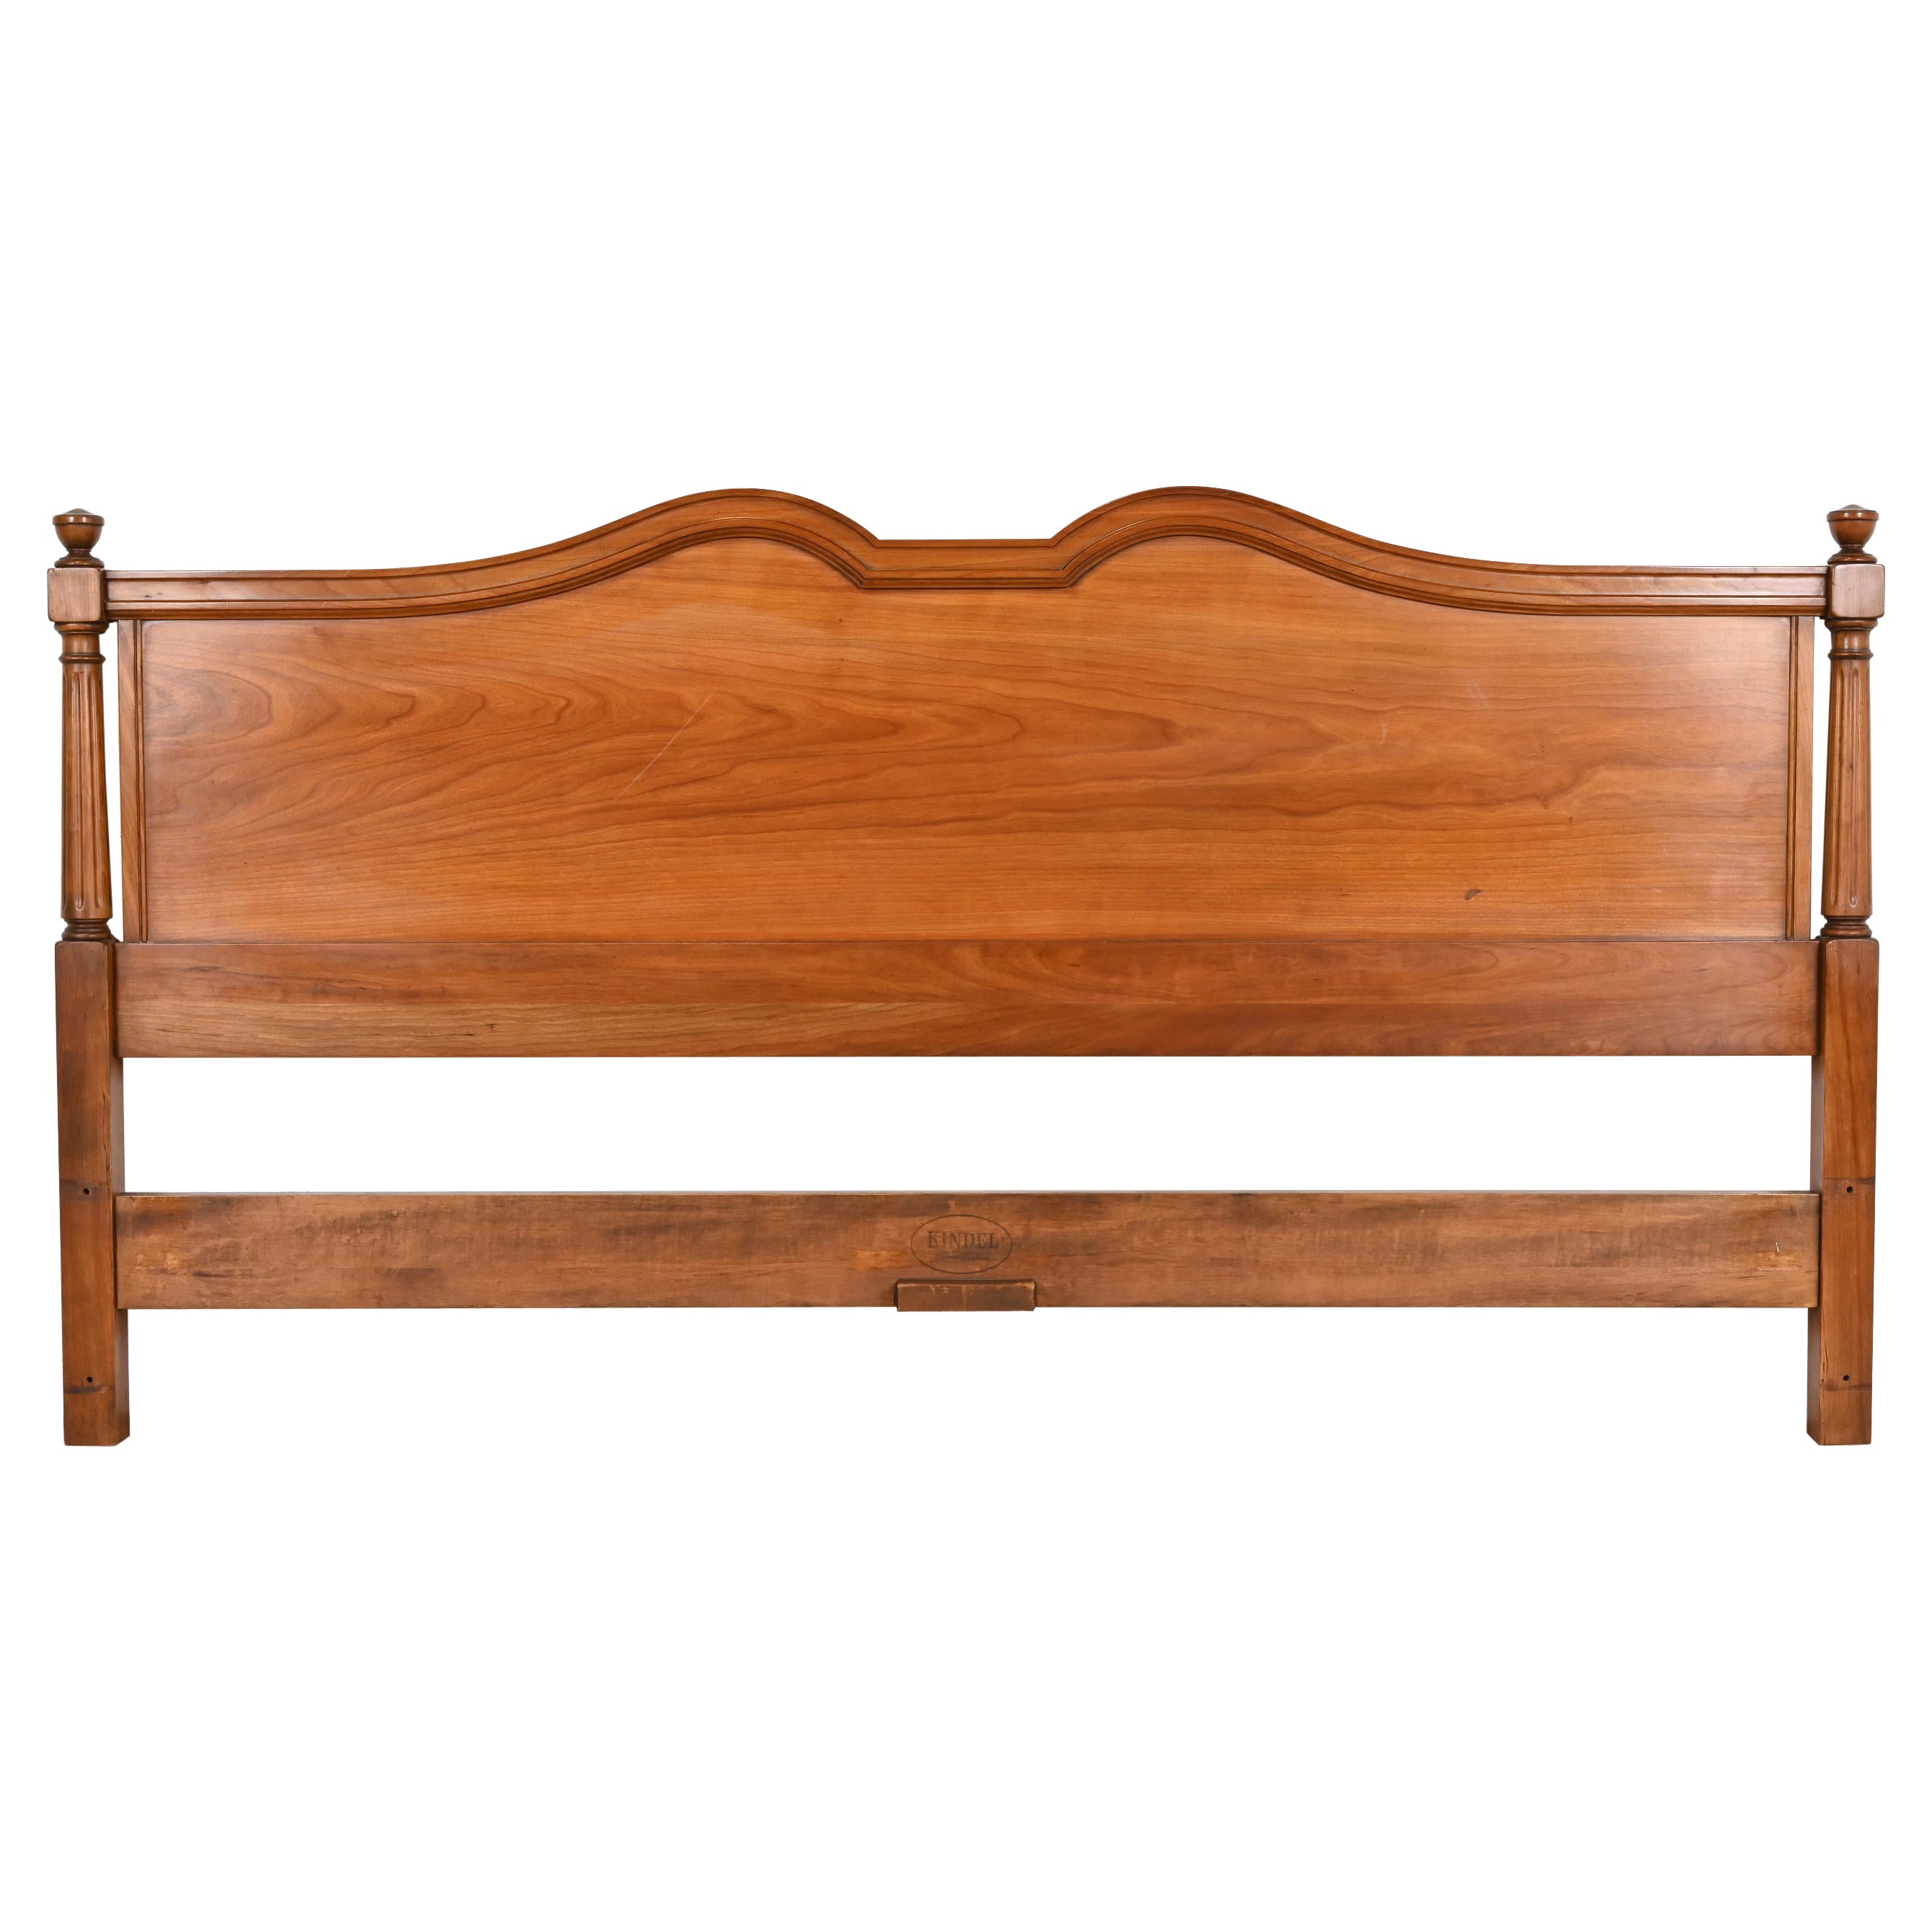 Kindel Furniture French Provincial Louis XV Cherry Wood King Size Headboard For Sale